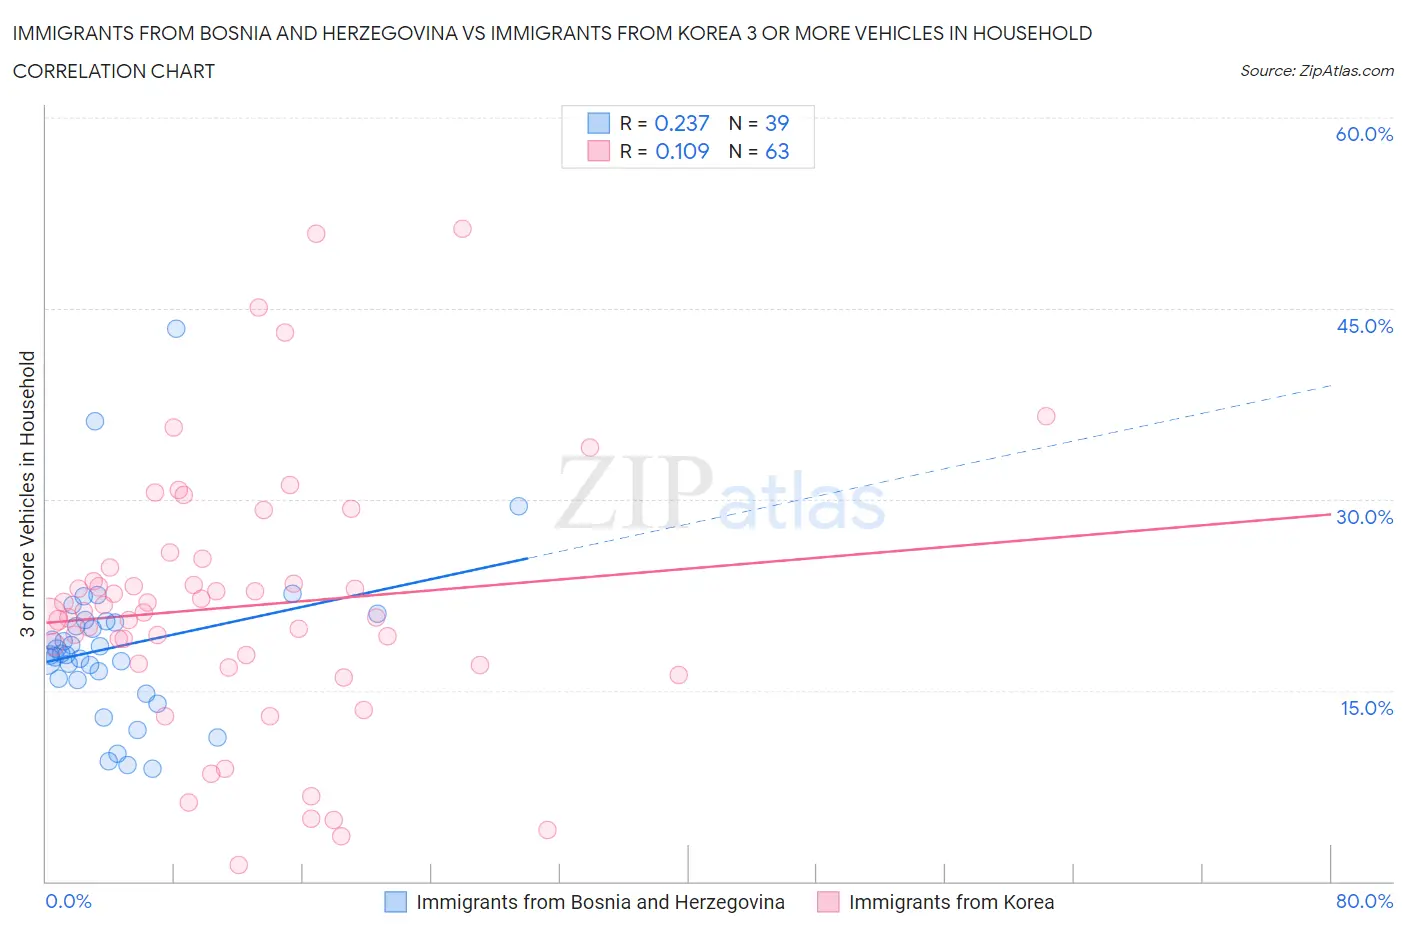 Immigrants from Bosnia and Herzegovina vs Immigrants from Korea 3 or more Vehicles in Household